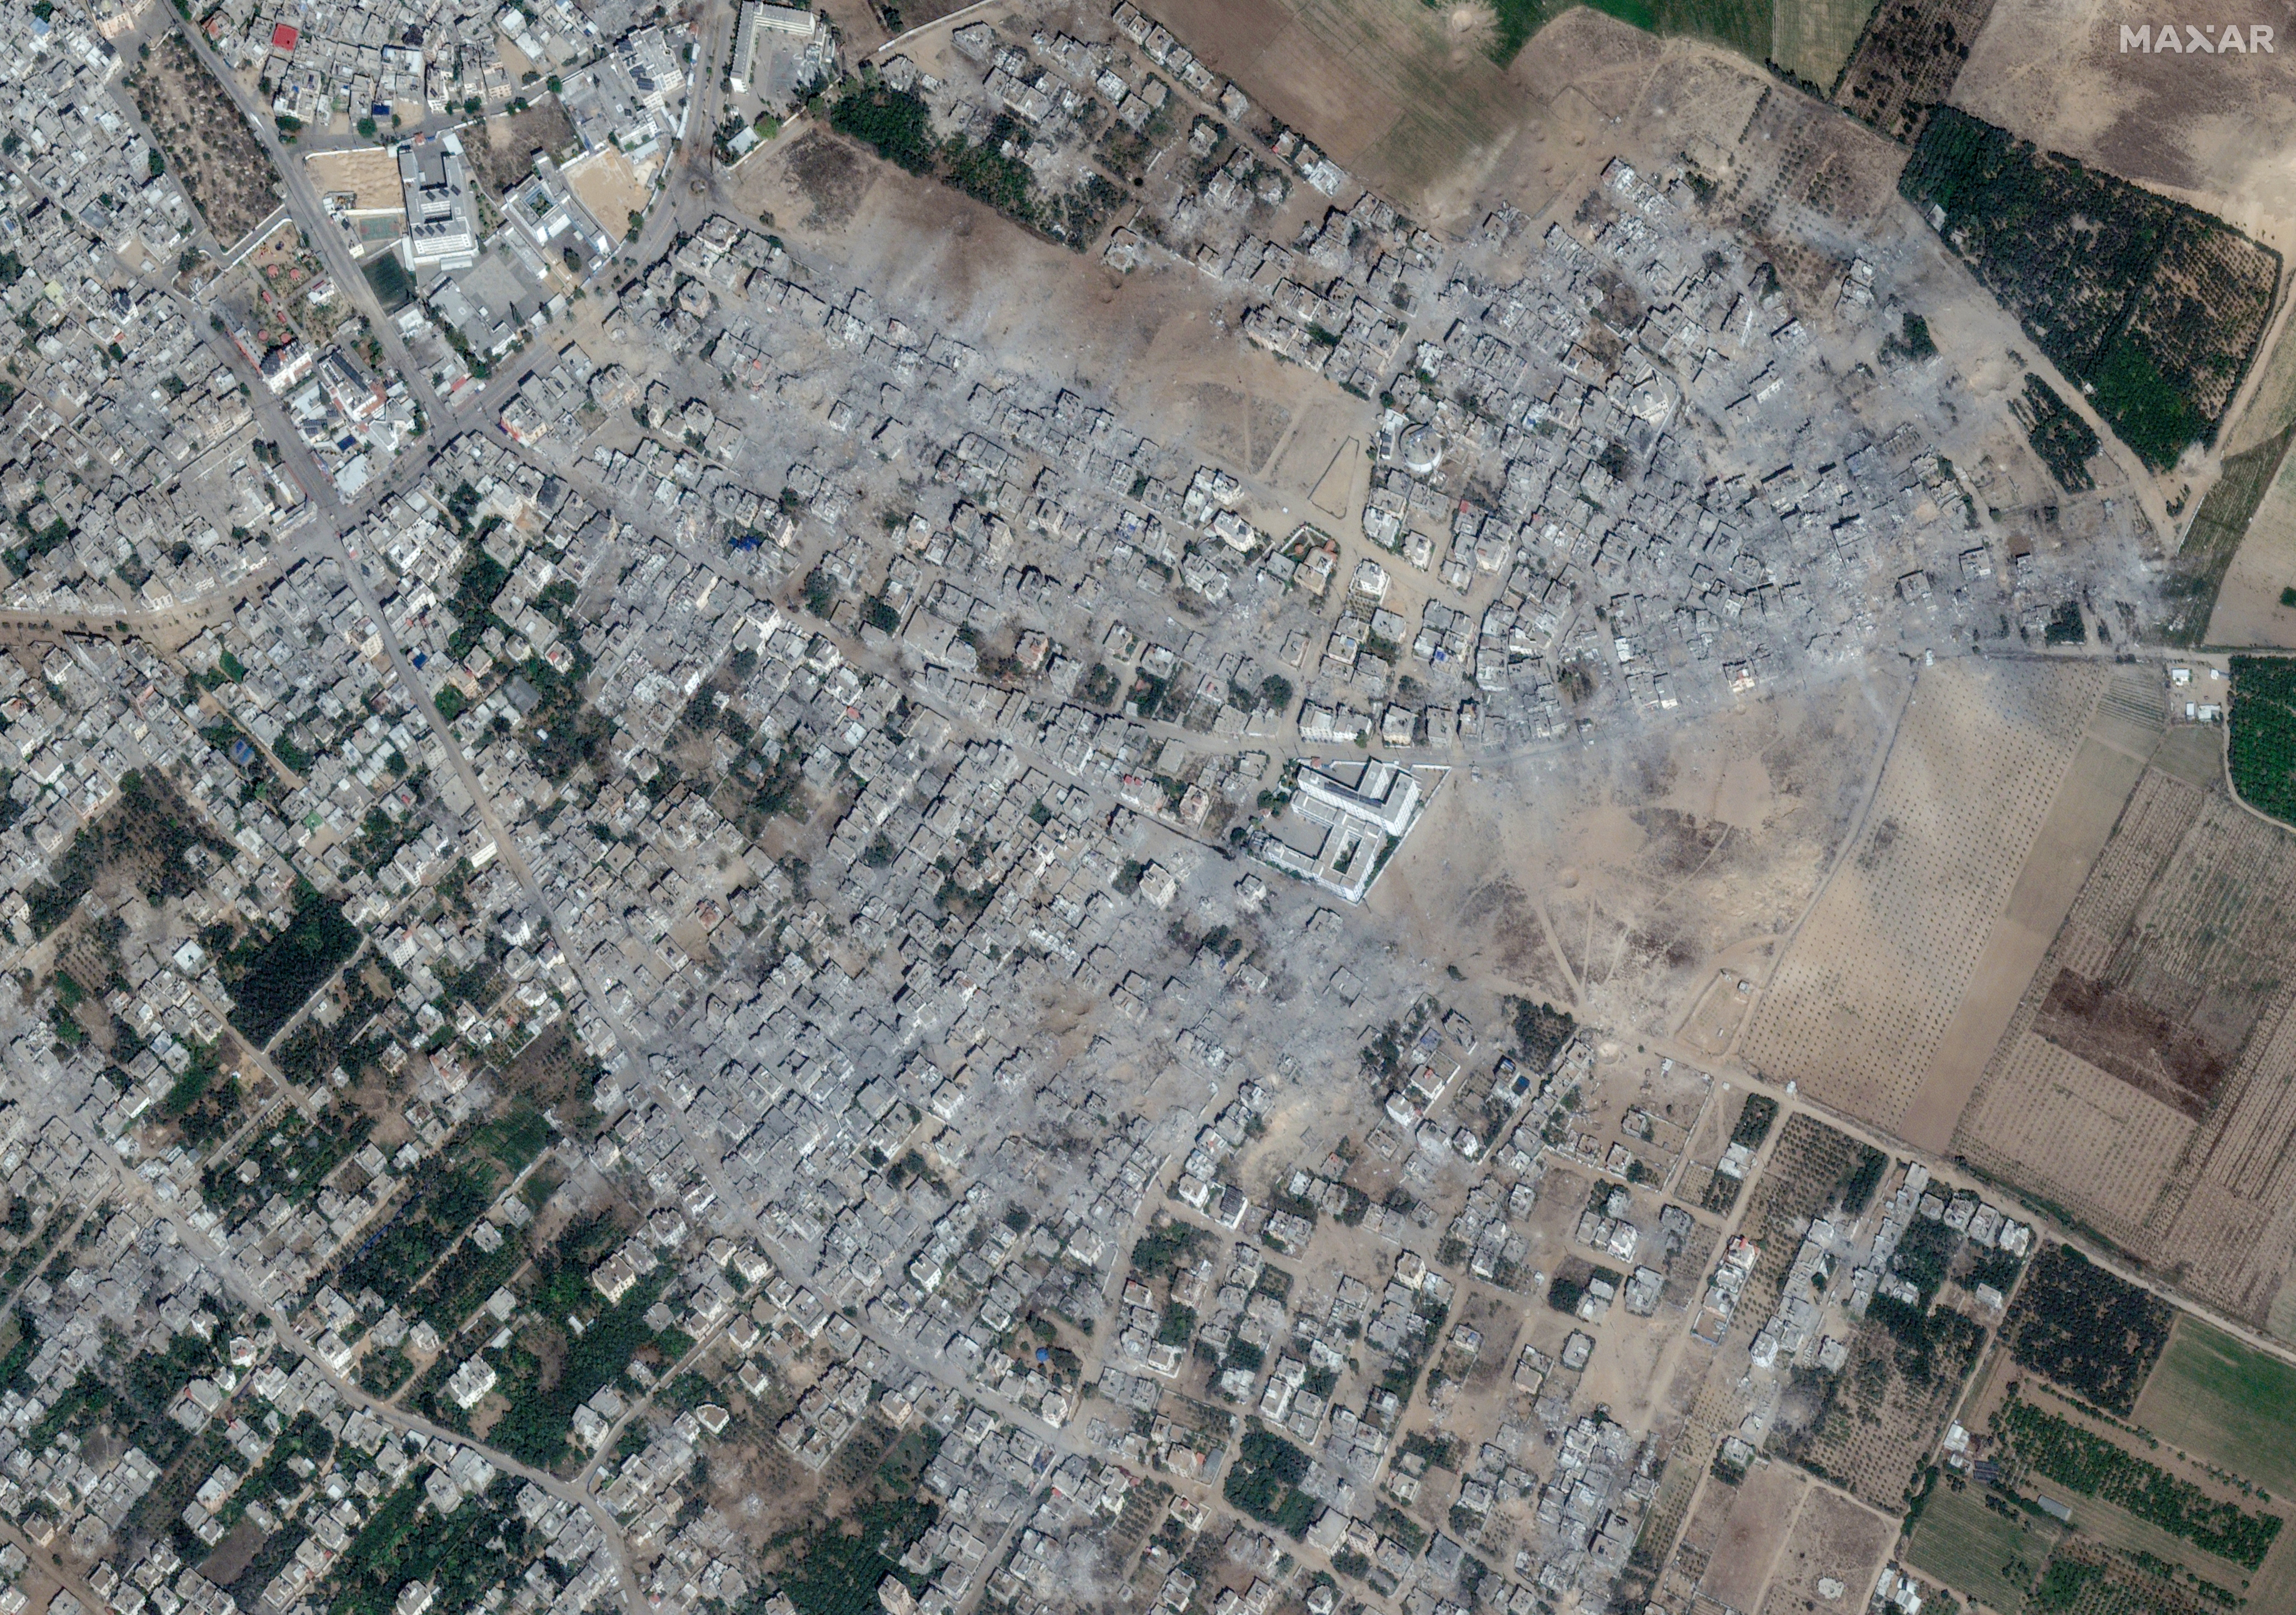 Satellite view shows damaged areas in the Palestinian city of Beit Hanoun in the northern Gaza Strip on 21 October, mostly reduced to charred remains and piles of grey ash